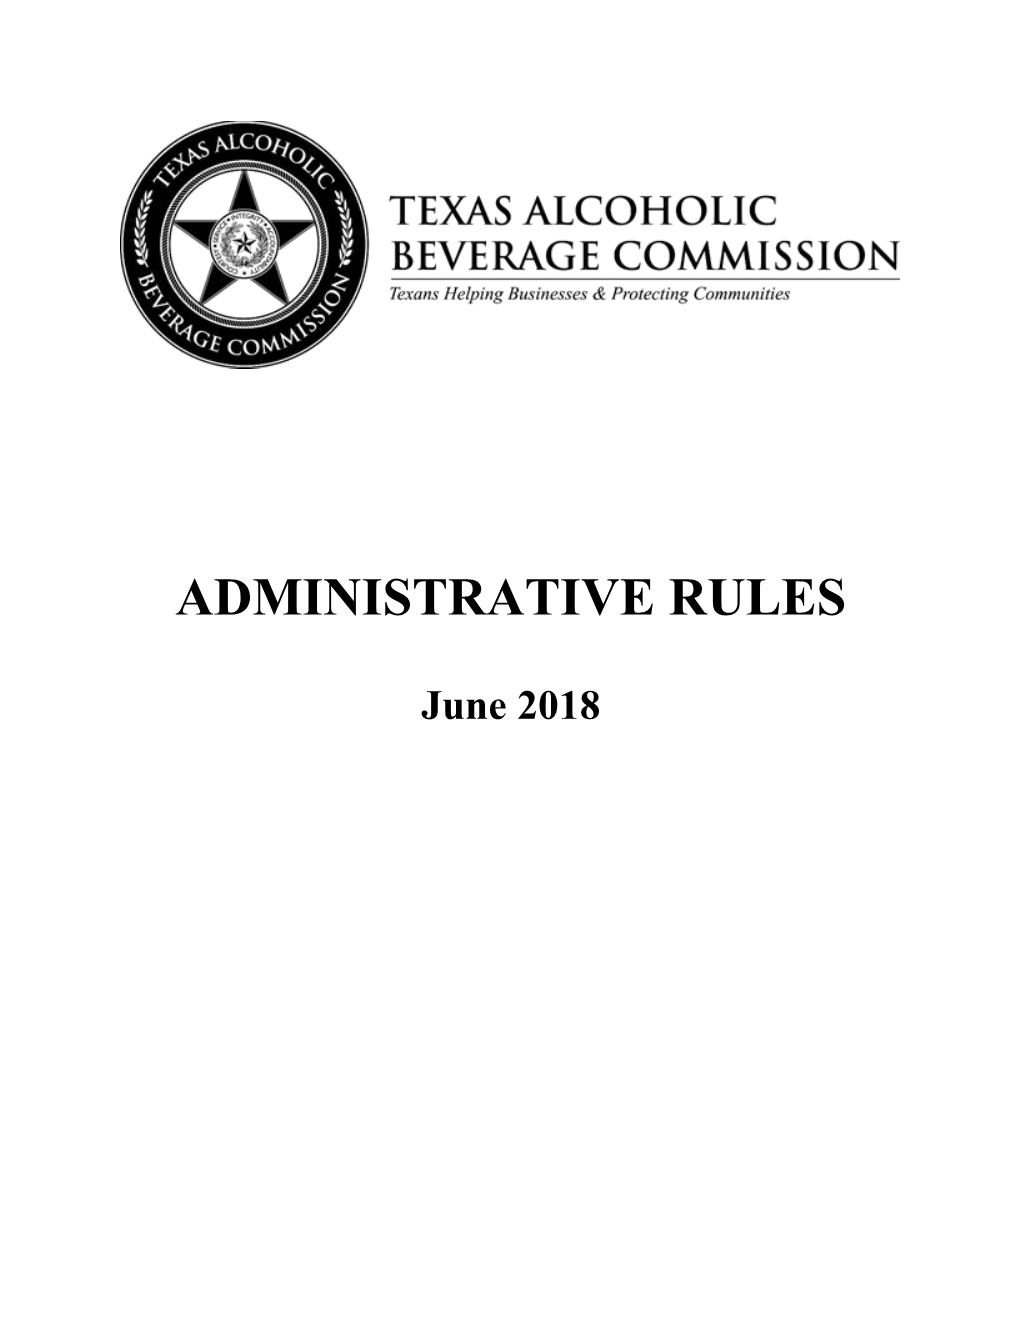 Administrative Rules